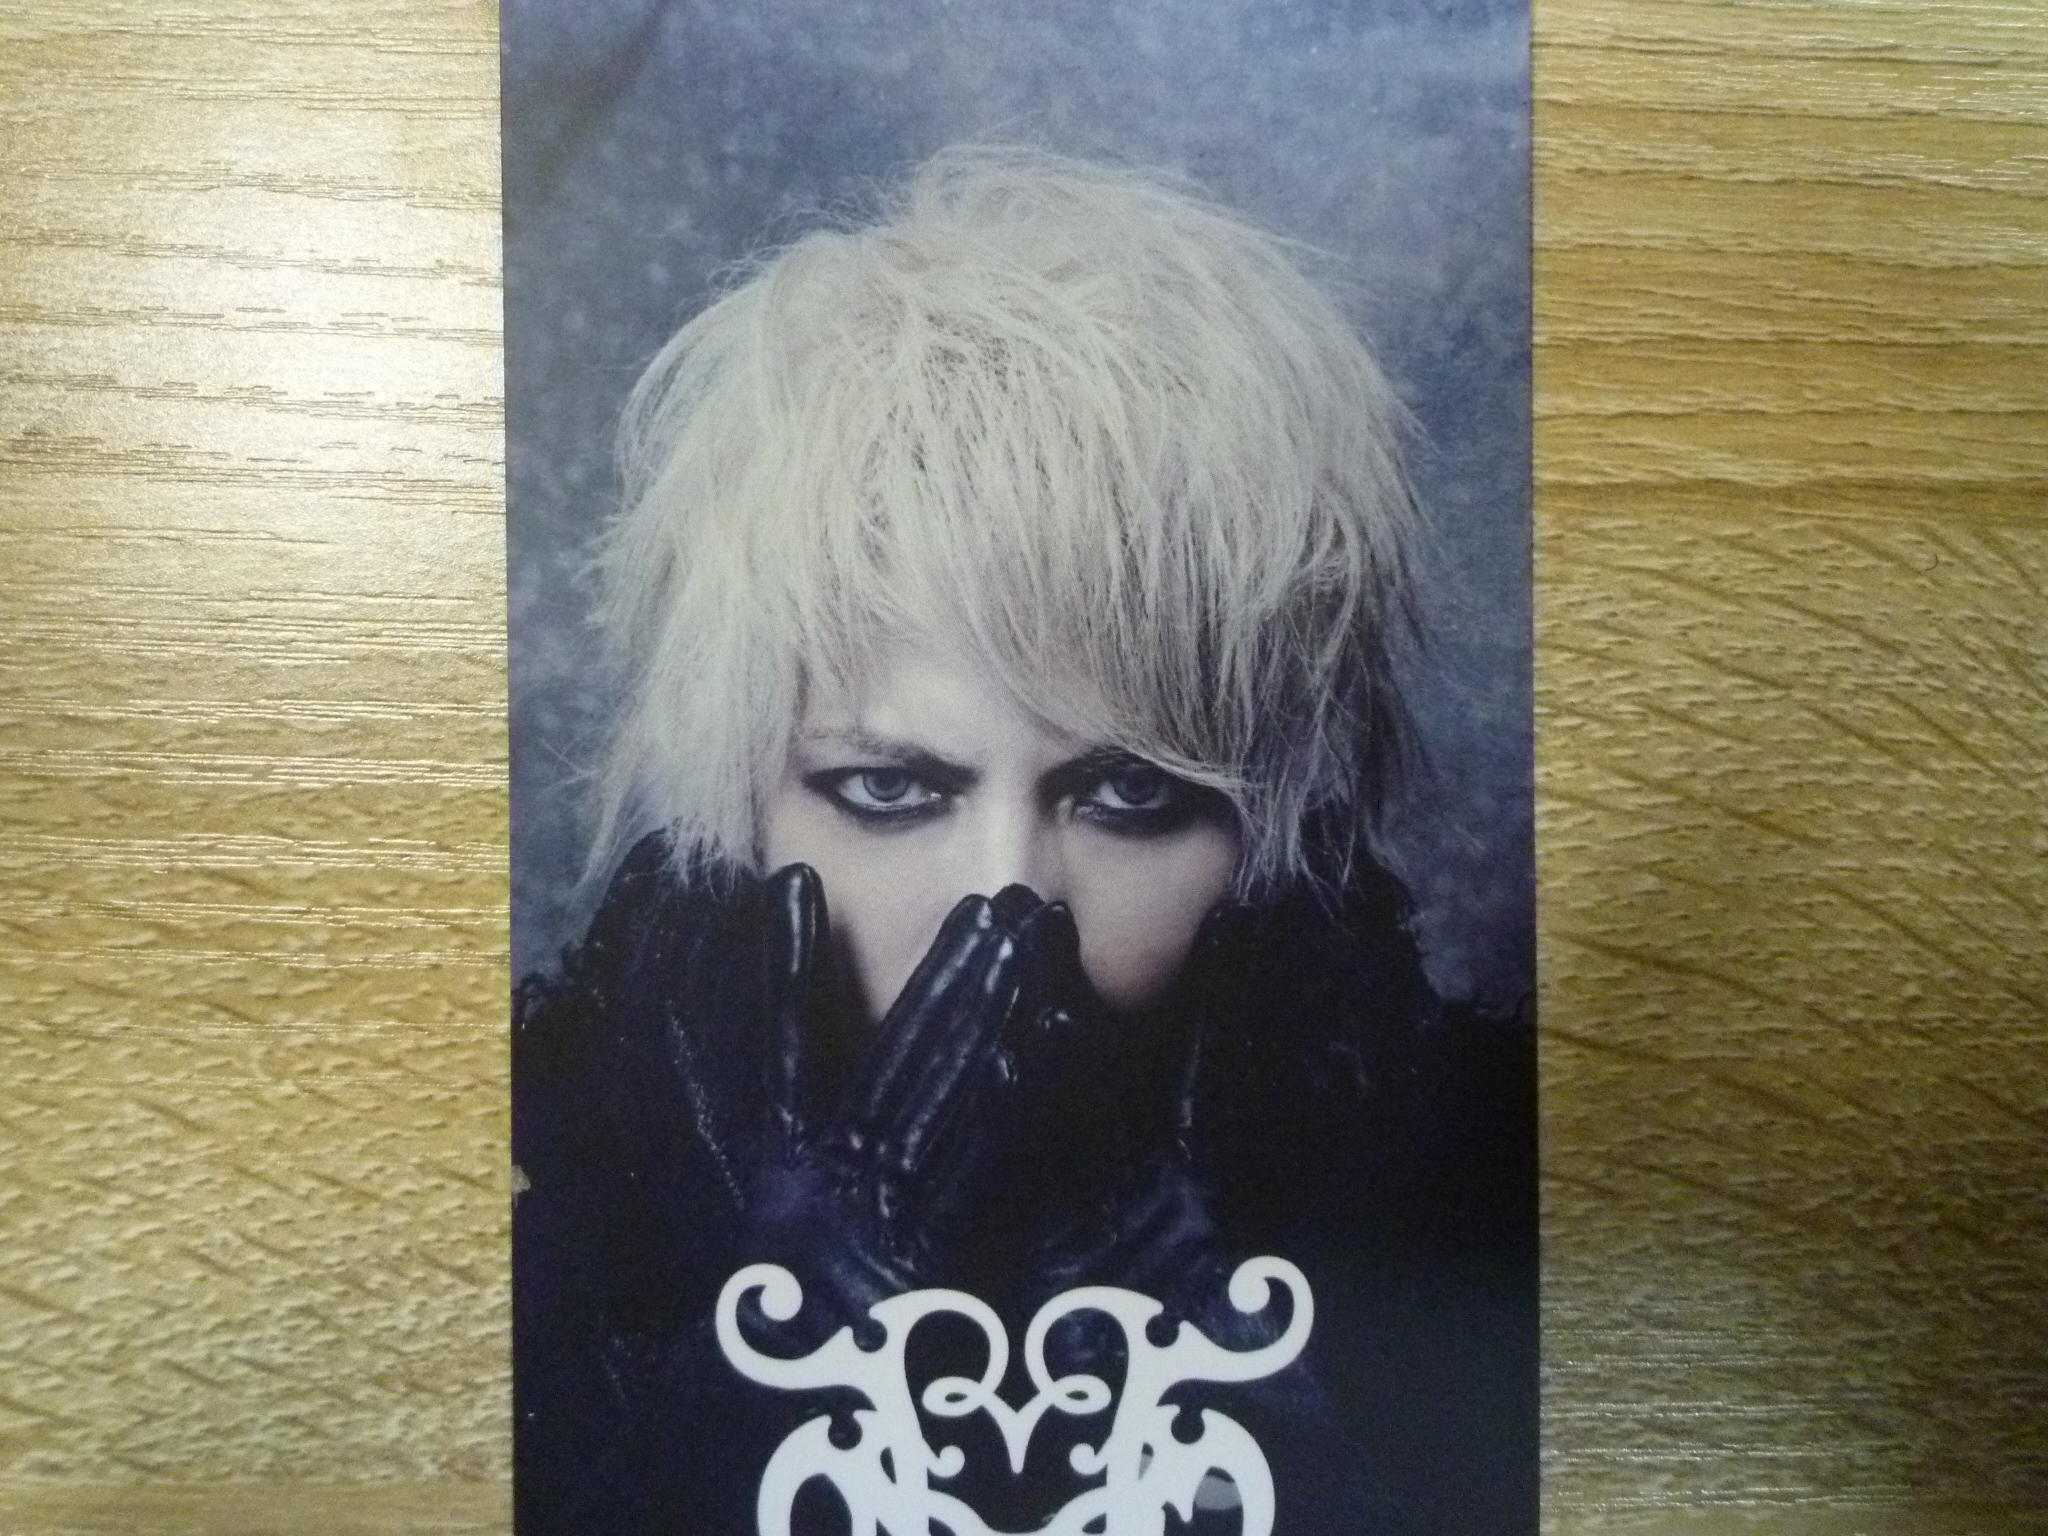 Hyde Hyde Christmas Concert 17 黑ミサ Tokyo 行ってきた その１ ハイド Dive To L Arc